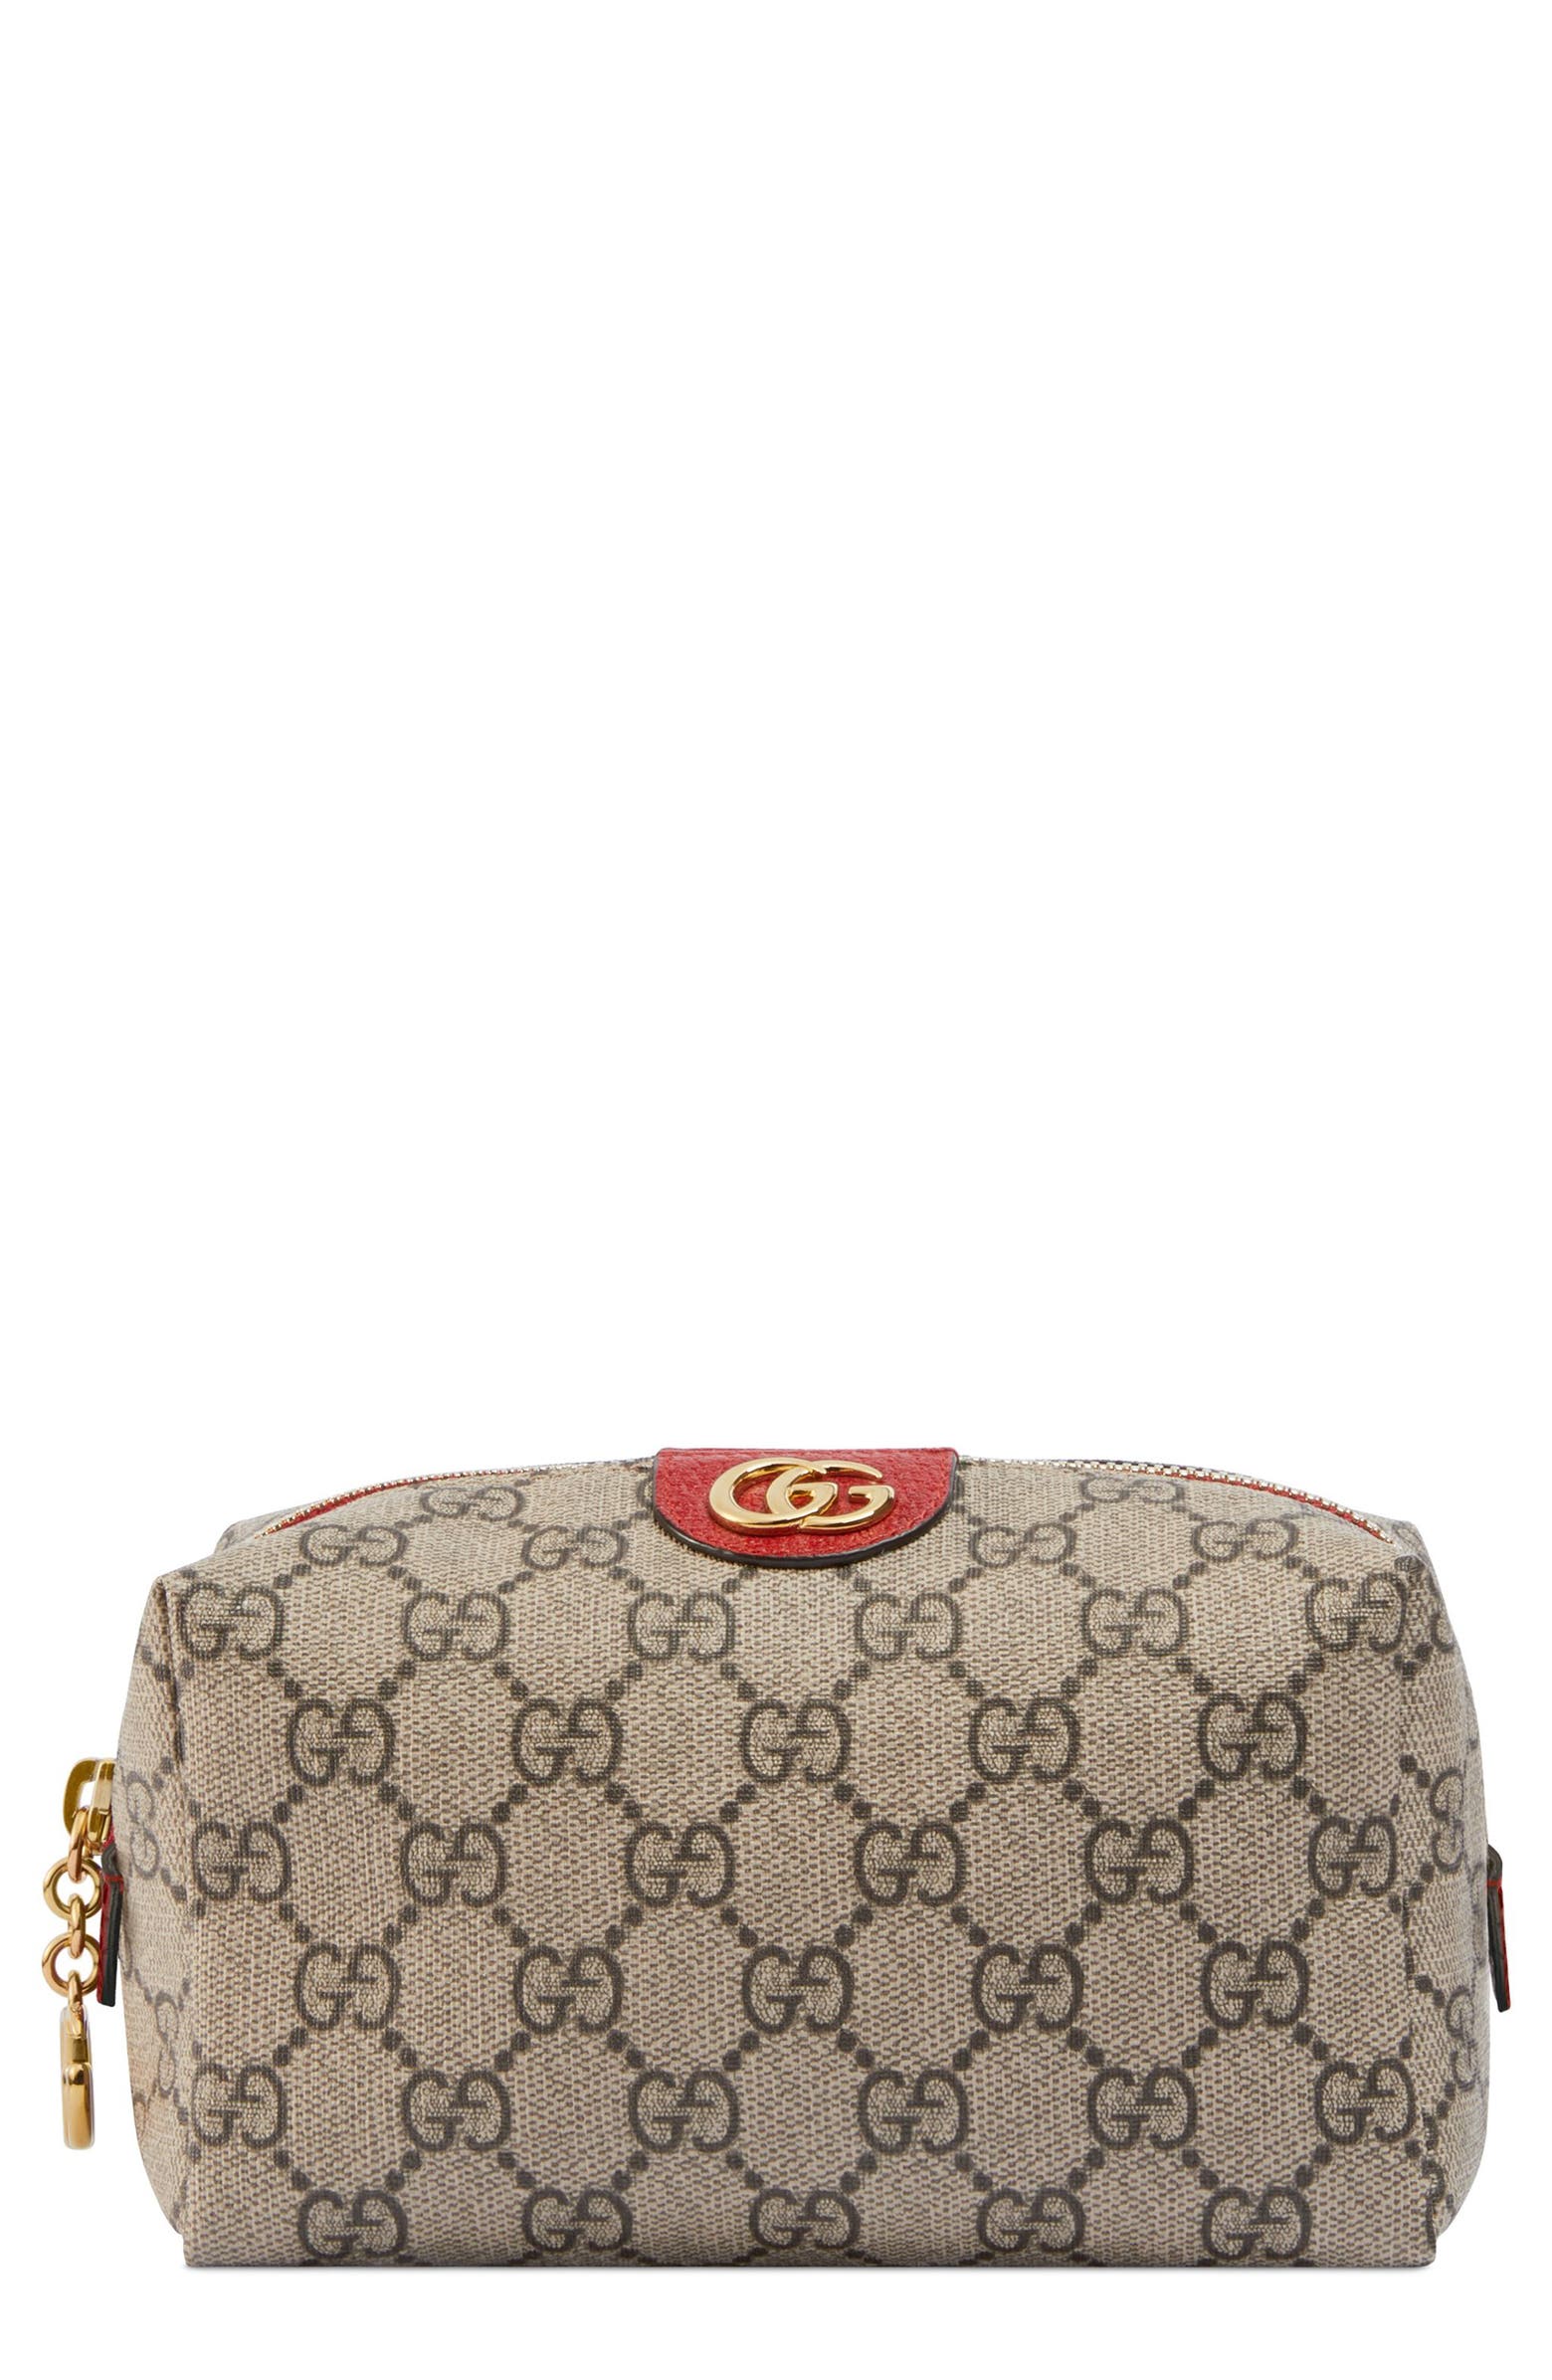 Gucci Small Ophidia Canvas Cosmetics Pouch | Nordstrom